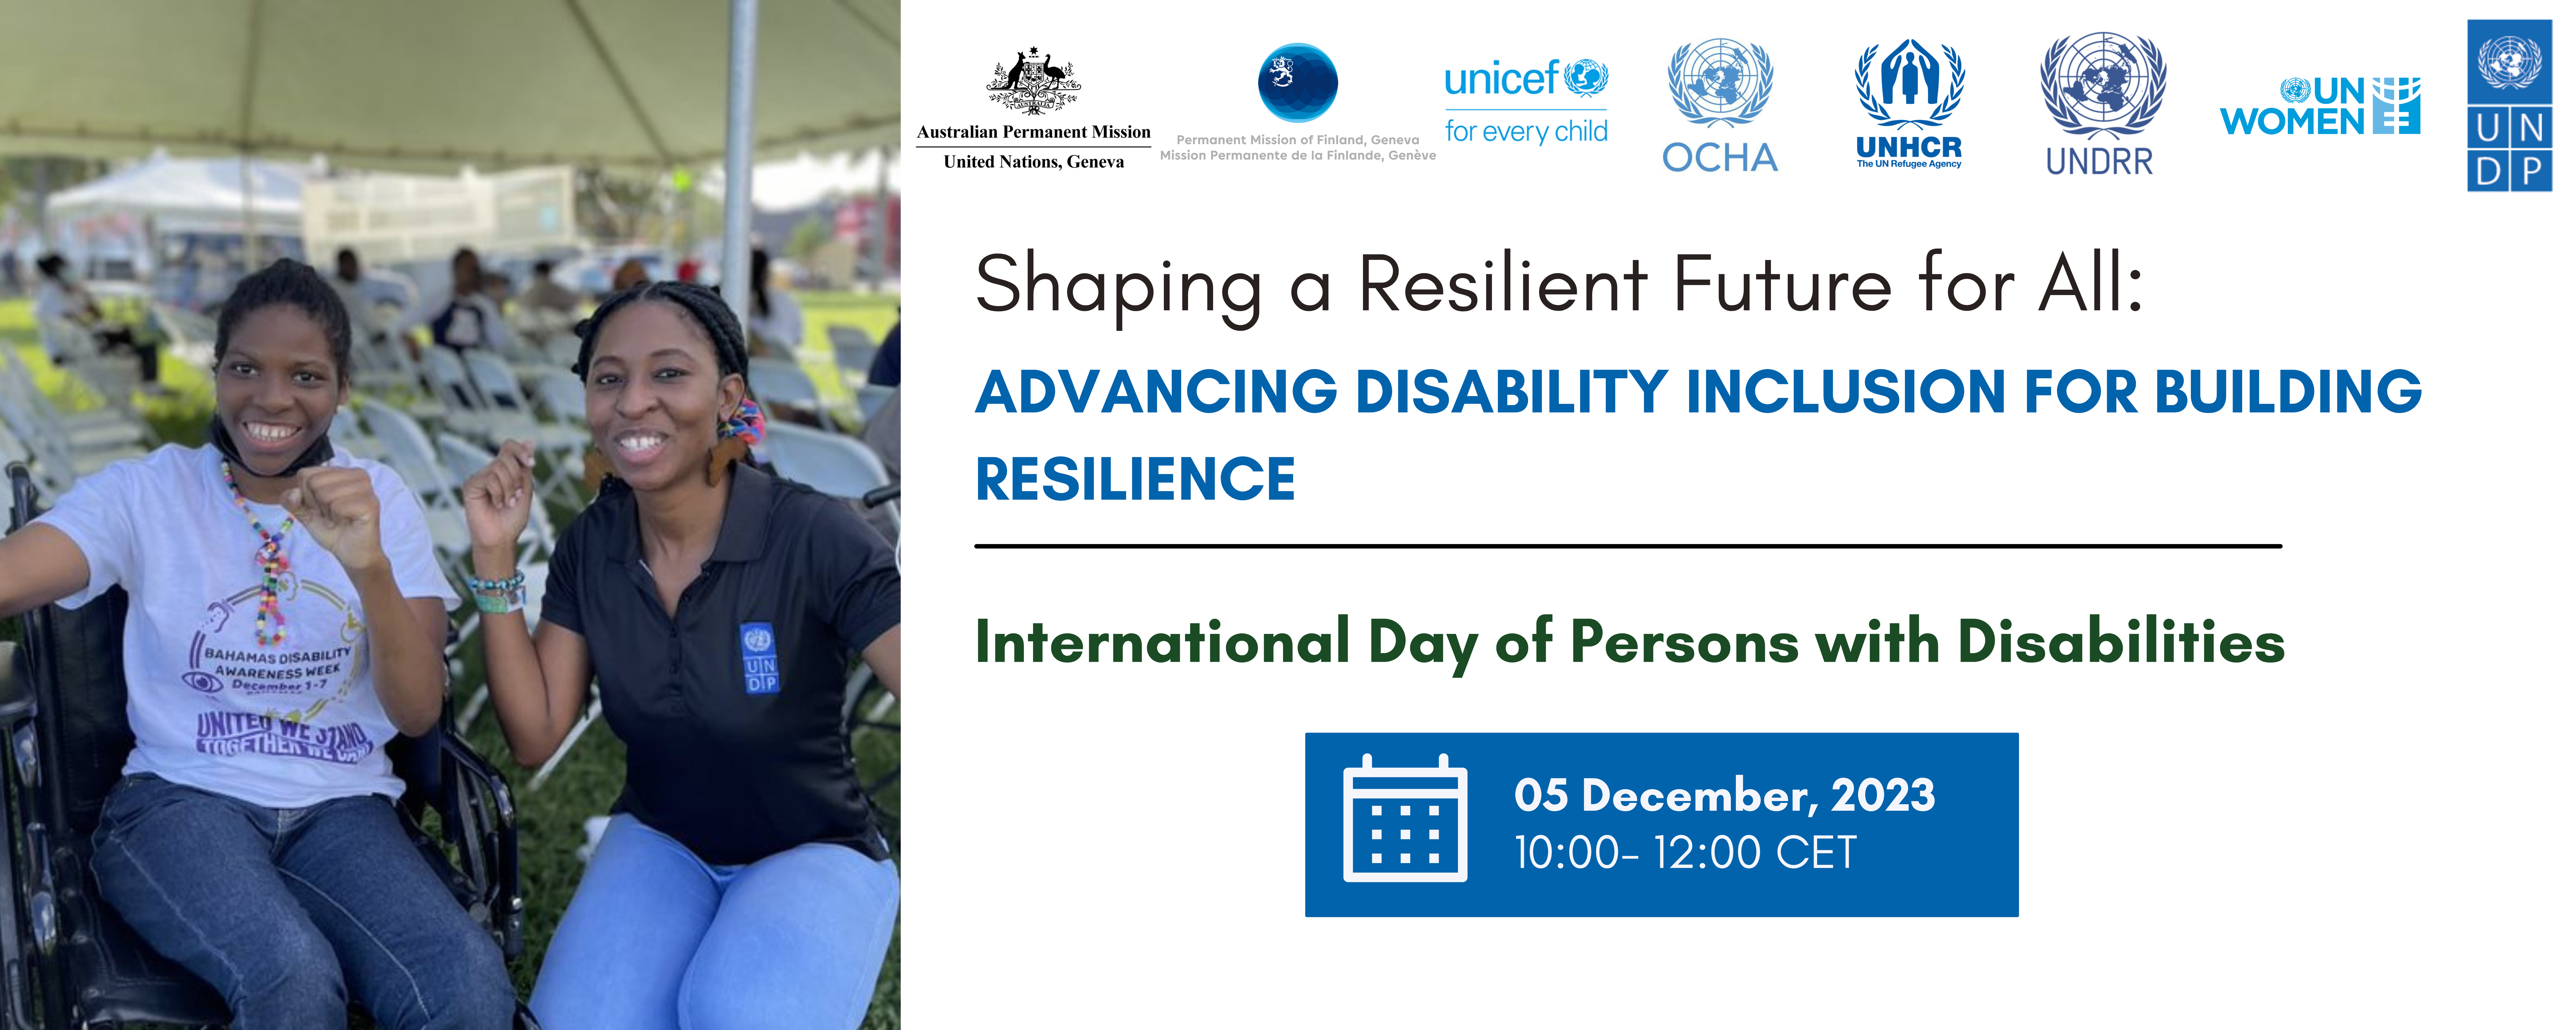 The image is a promotional poster for an event related to the International Day of Persons with Disabilities. On the left side of the poster, there are two smiling women giving a thumbs-up sign; one is seated in a wheelchair. Text on the right side of the poster states "Shaping a Resilient Future for All: Advancing Disability Inclusion for Building Resilience". It mentions that the event is on 05 December, 2023, from 10:00 AM to 12:00 PM CET.